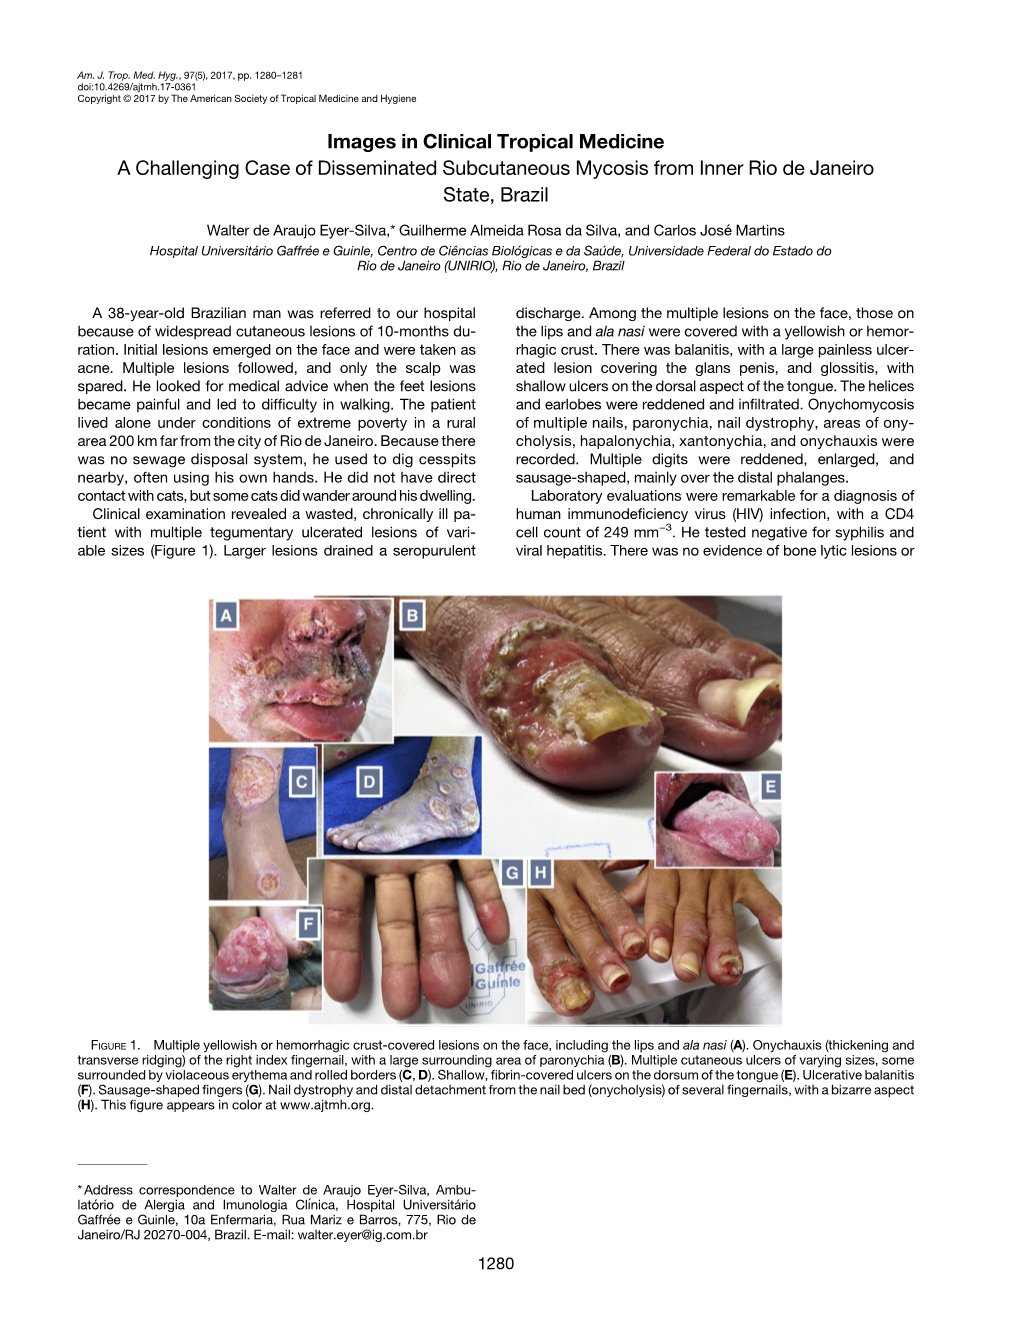 Images in Clinical Tropical Medicine a Challenging Case of Disseminated Subcutaneous Mycosis from Inner Rio De Janeiro State, Brazil